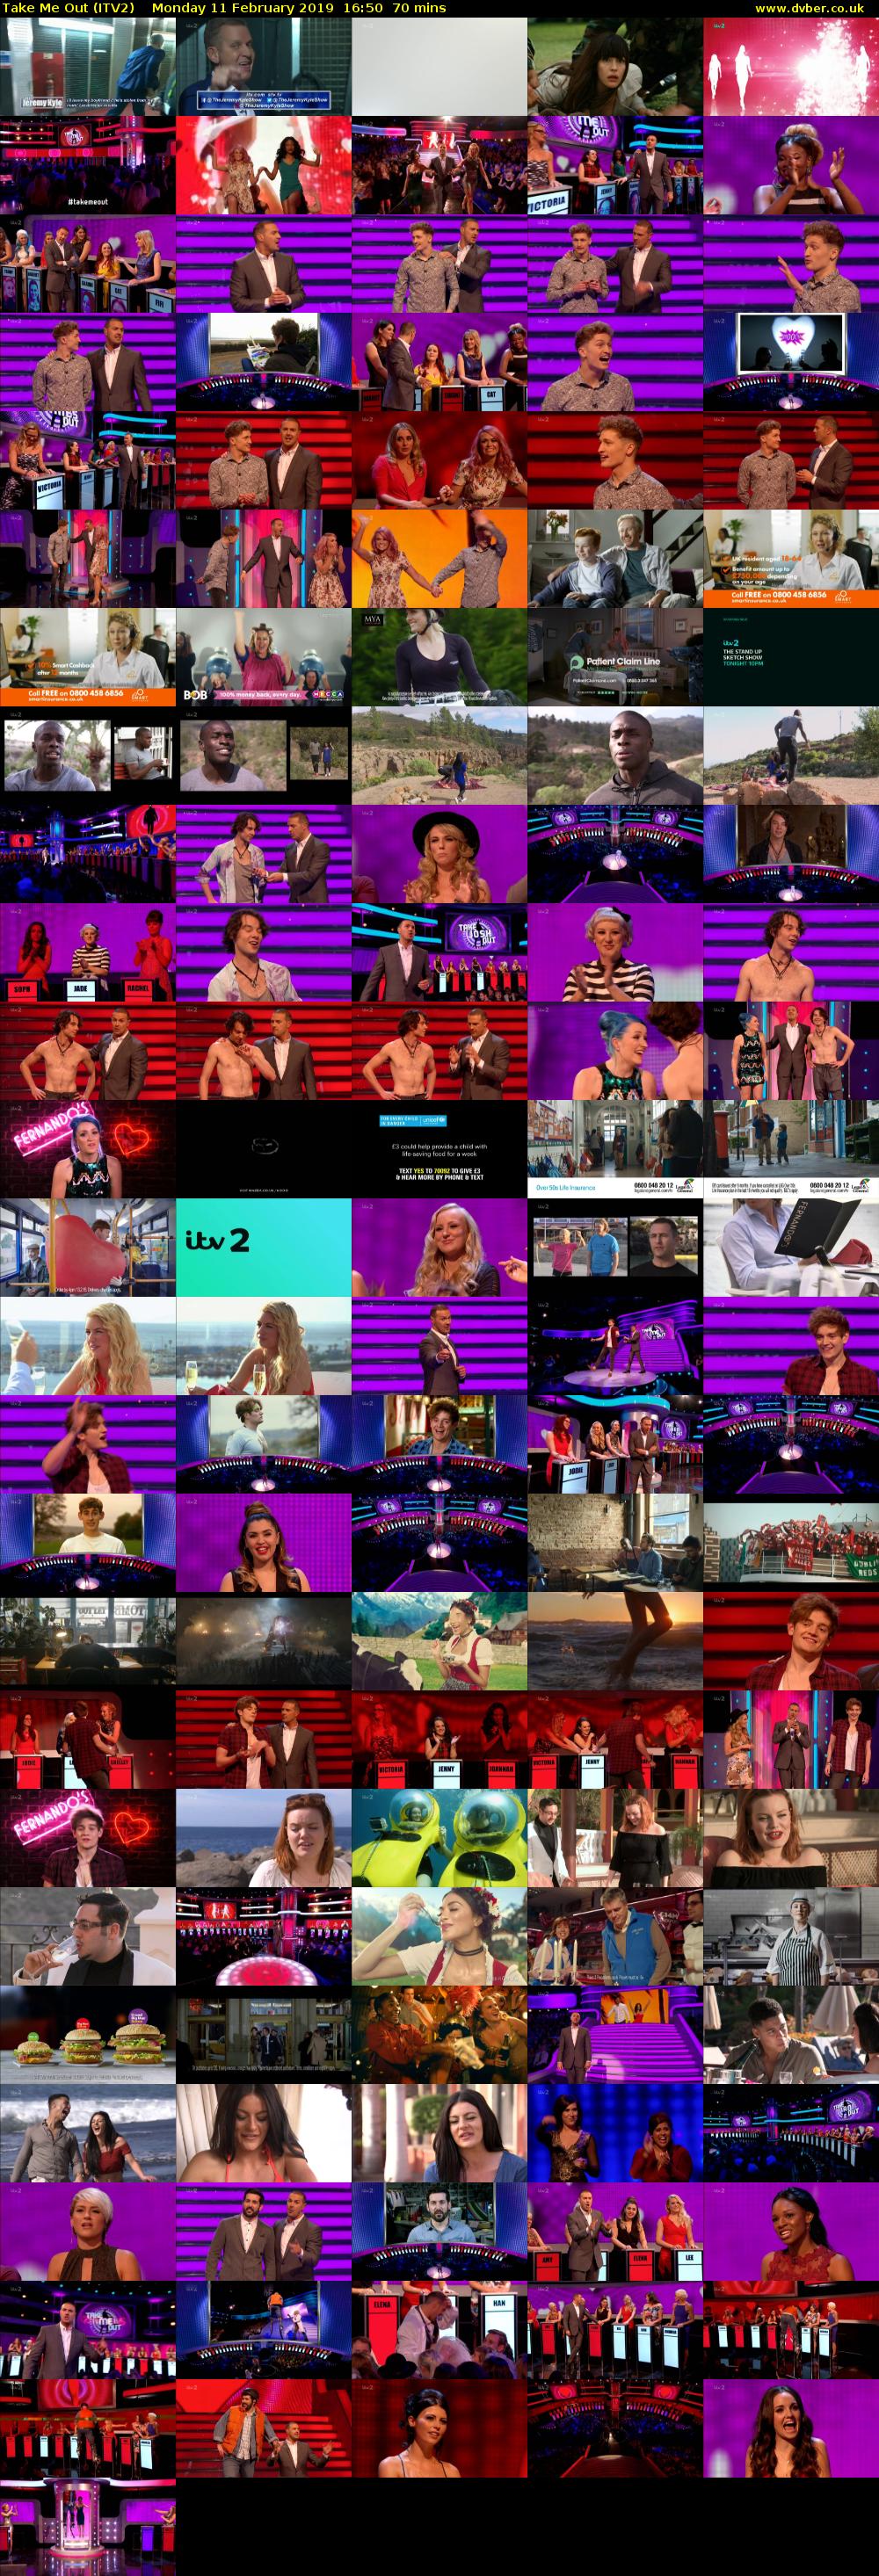 Take Me Out (ITV2) Monday 11 February 2019 16:50 - 18:00